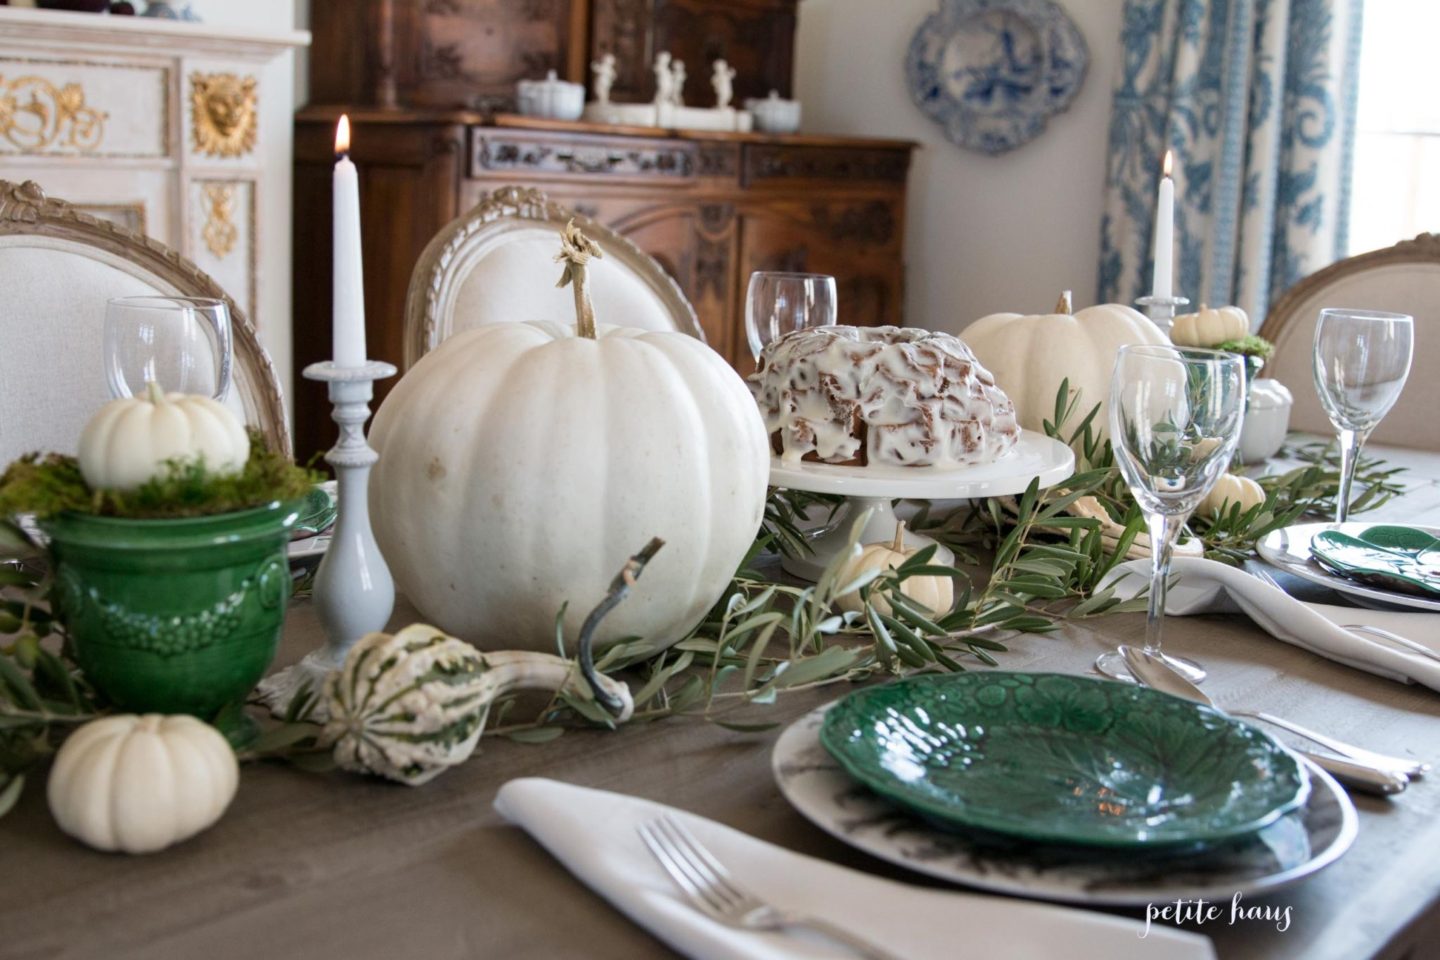 Fall Thanksgiving table #tabledecorations #tablescapes #tabledecor #tablecenterpieces #tablesettingideas #falltablesettings #farmhousetablesettings #autumntablescapes #casualtablesettings #beautifultablesettings #uniquetablescapes #neutraltablescapes #thanksgivingtablesettings #dinnertpartytablescapes